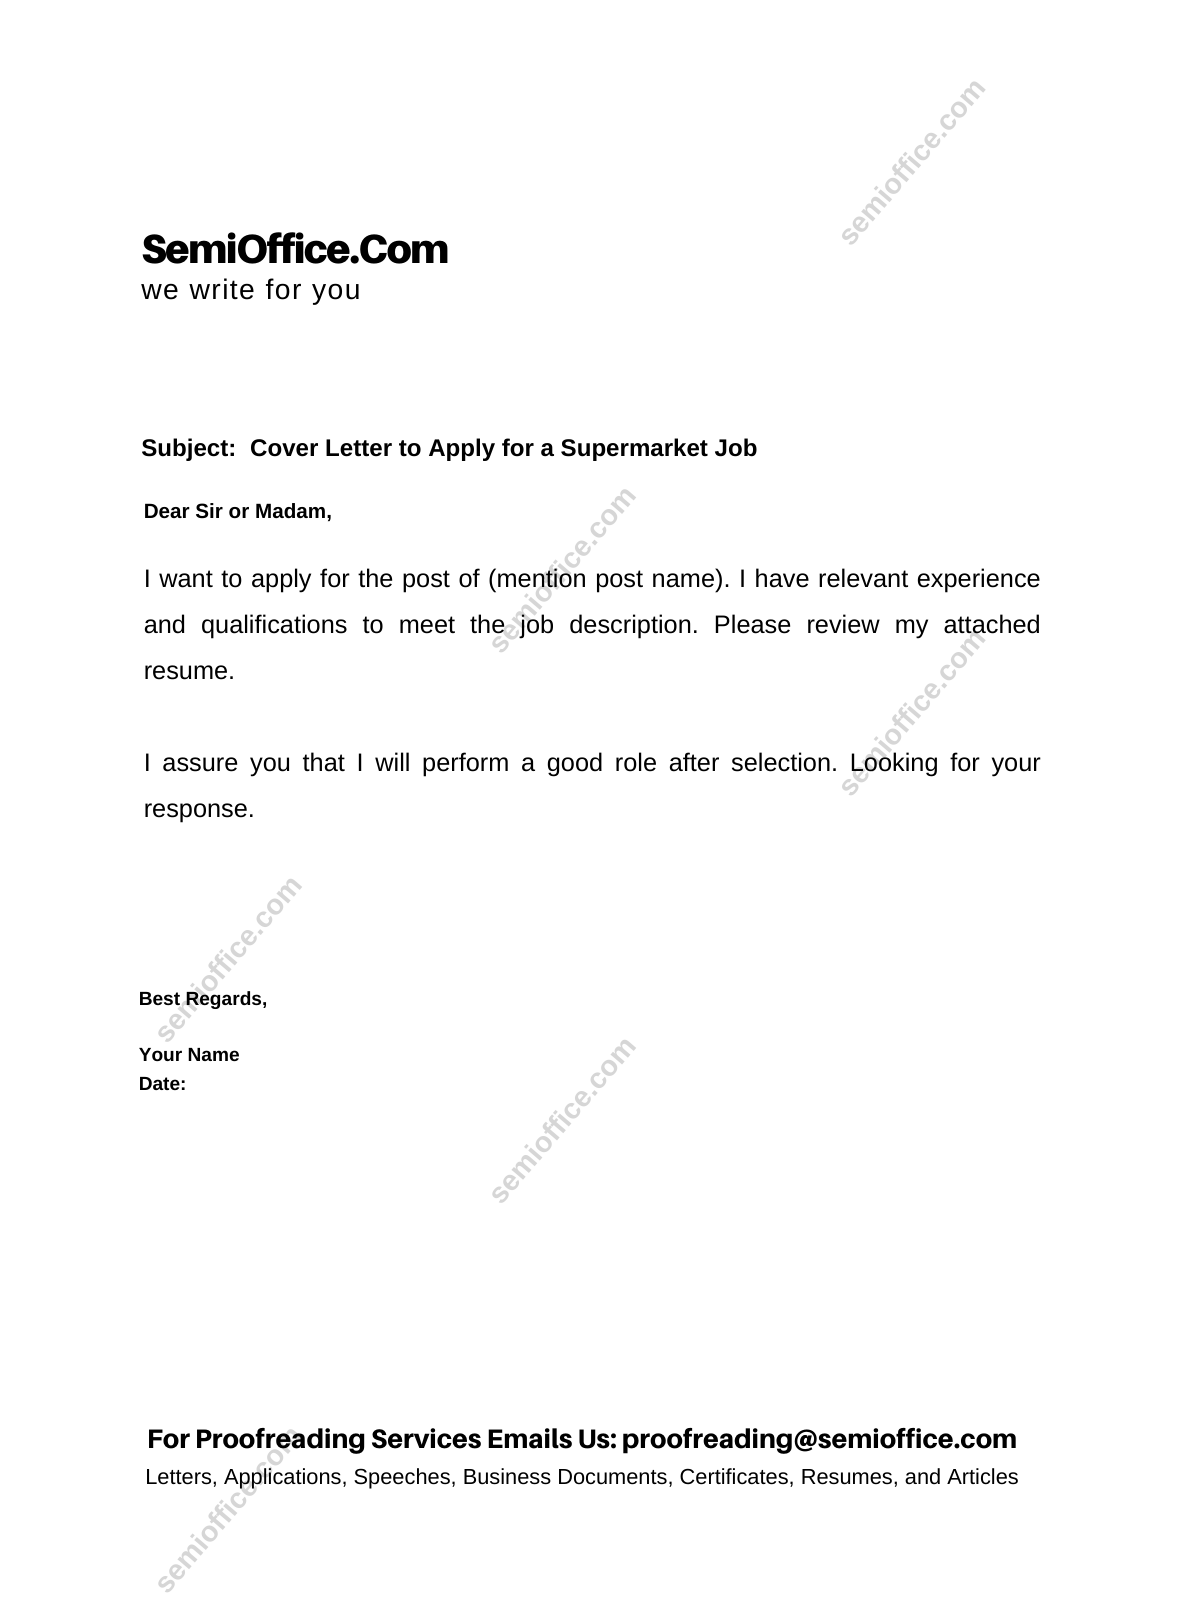 example of application letter for a job in a supermarket